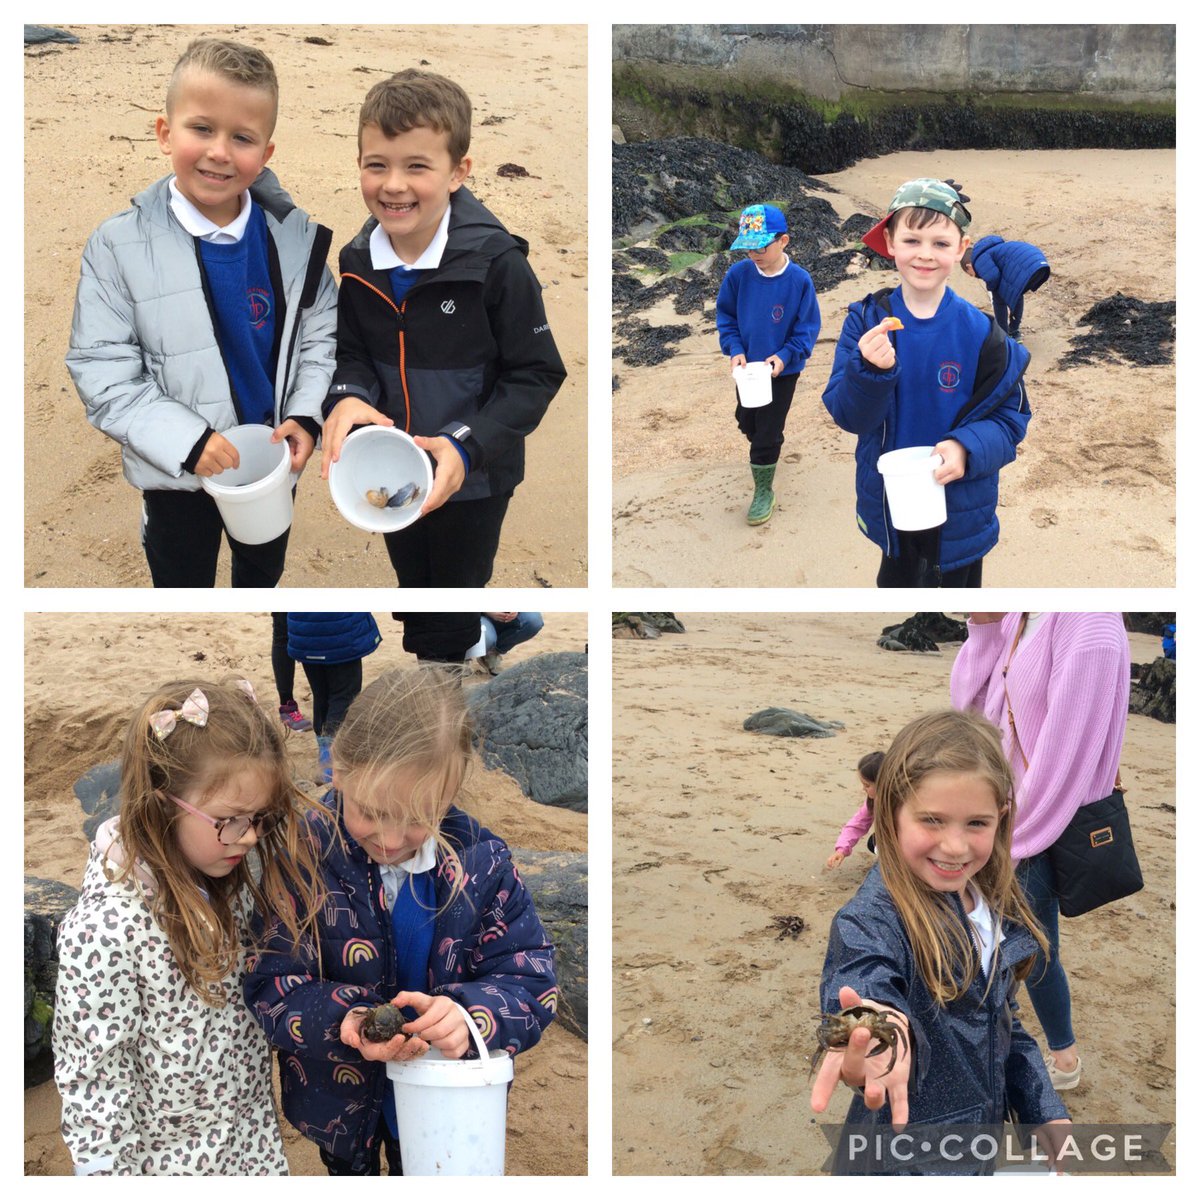 We had a fantastic time being coastal explorers at Greyhope Bay today. We learnt lots of facts from Rachel and Fiona and saw dolphins and seals and collected lots of different shells. @DanestoneP @greyhopebay